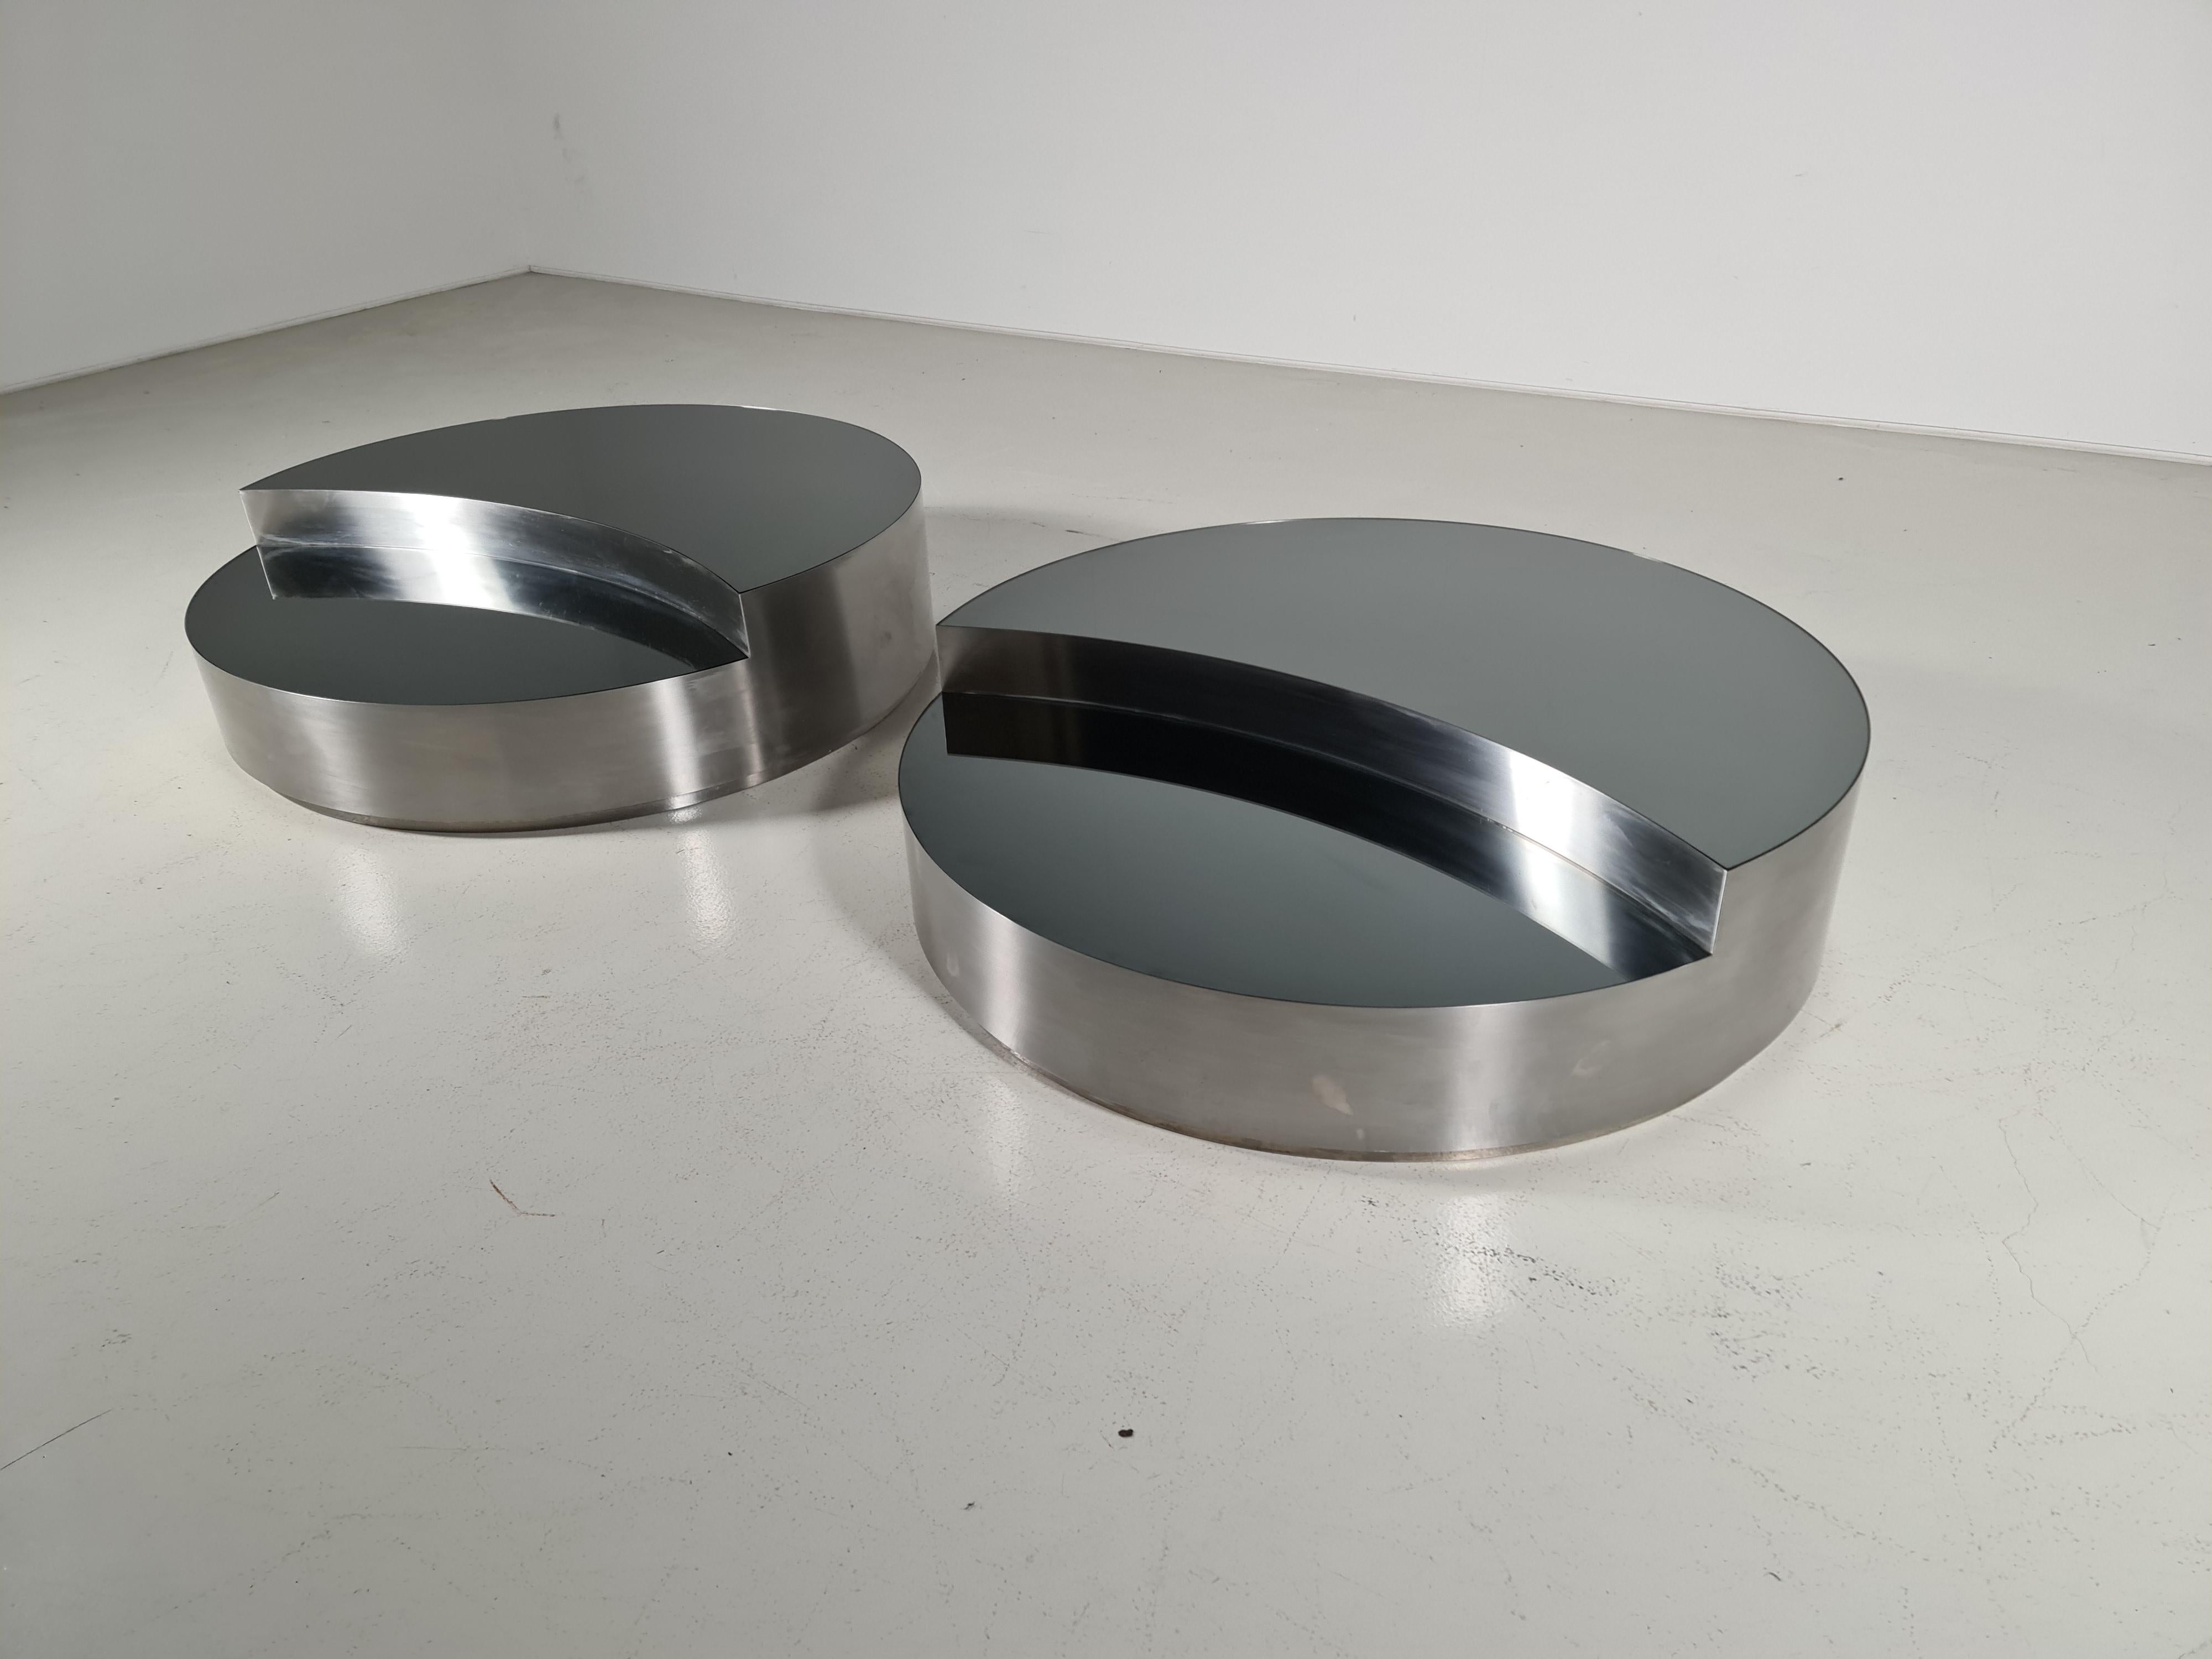 Coffee table in the style of the TRG revolving table made by Willy Rizzo and Massimo Papiri. Brushed stainless steel base and a smoked mirrored top. From the 1970s. We have 2 available.